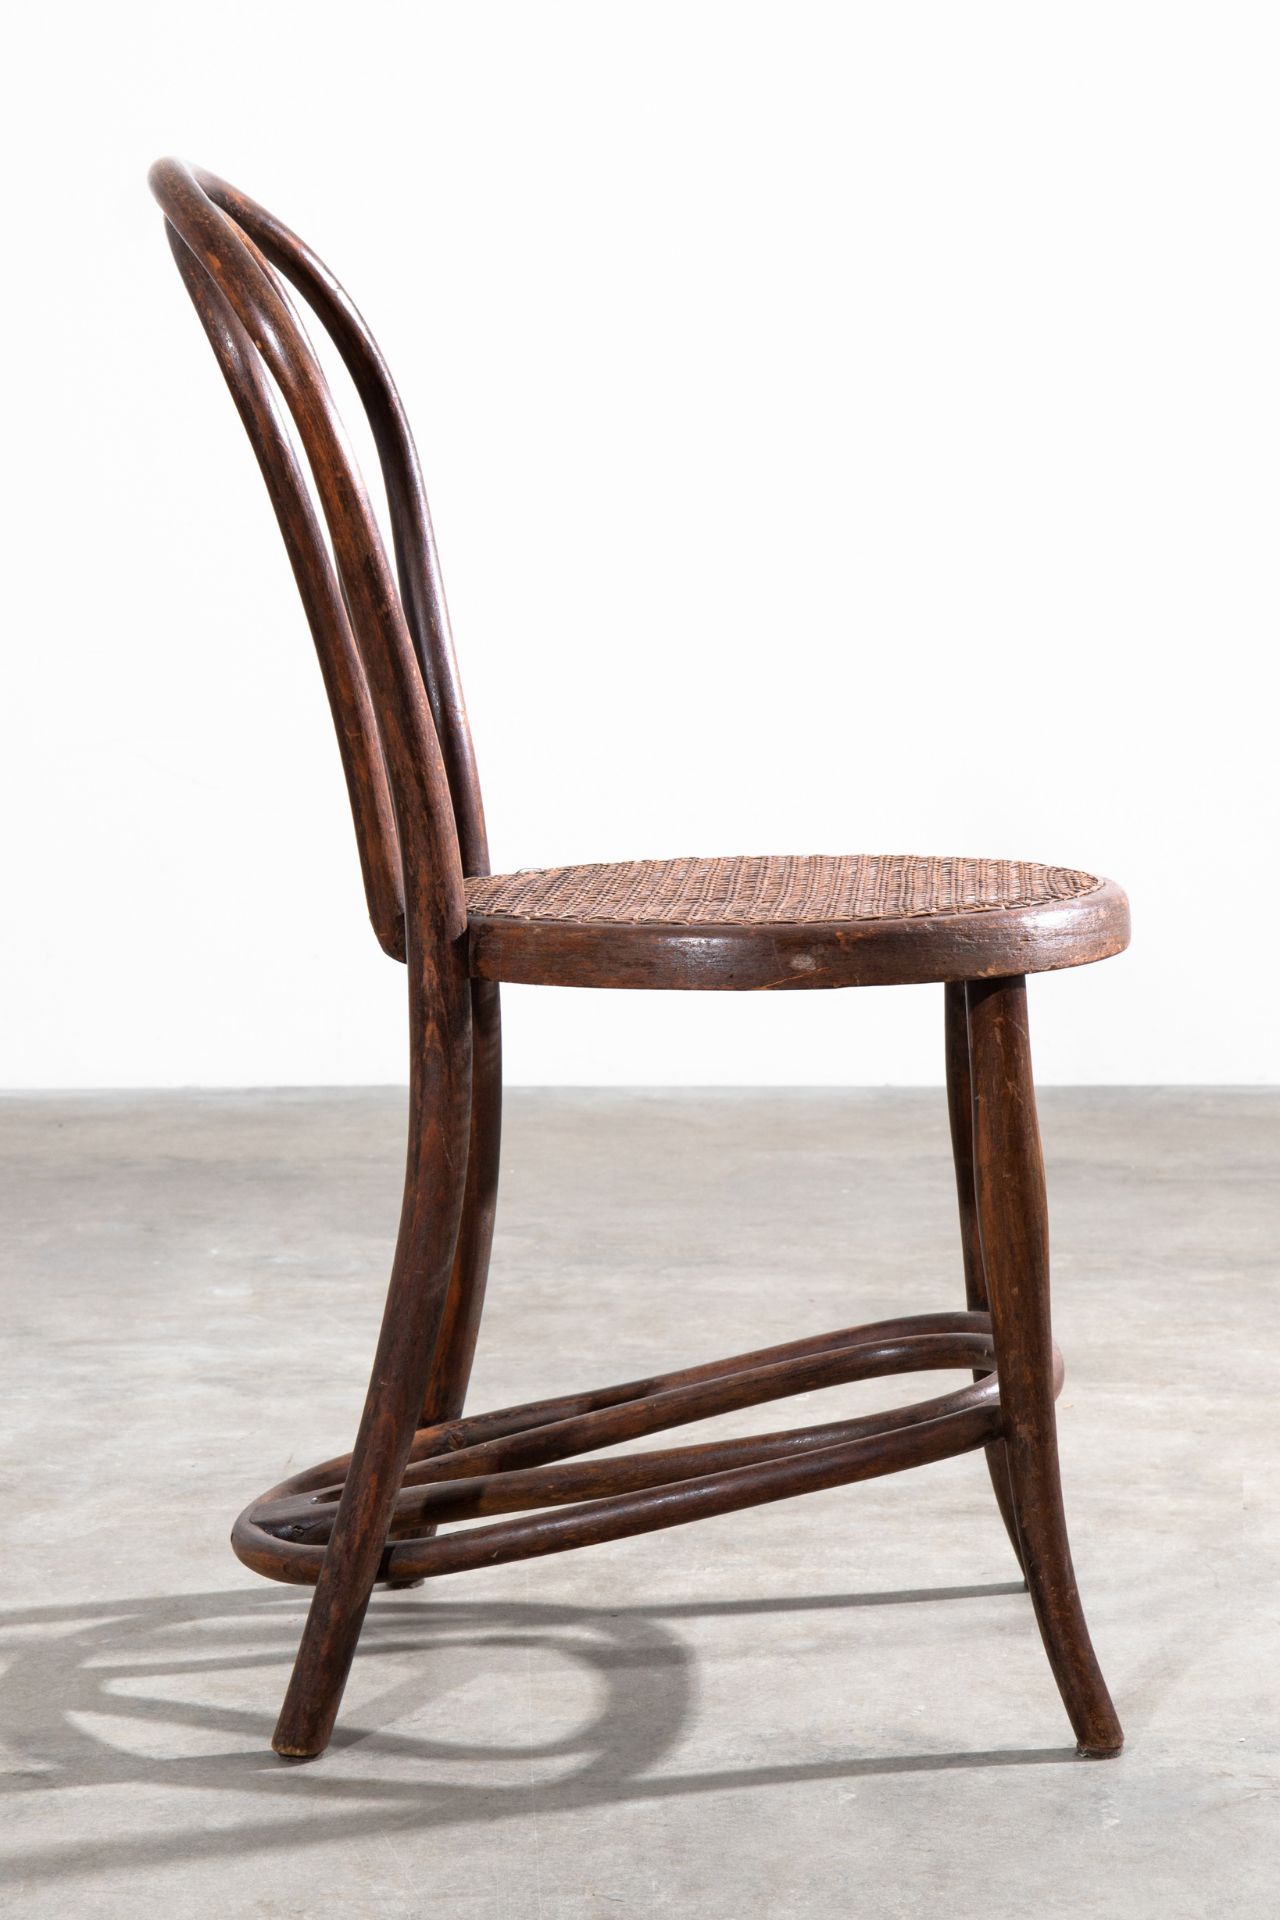 Thonet chair no. 18 with boot jack - Image 4 of 8